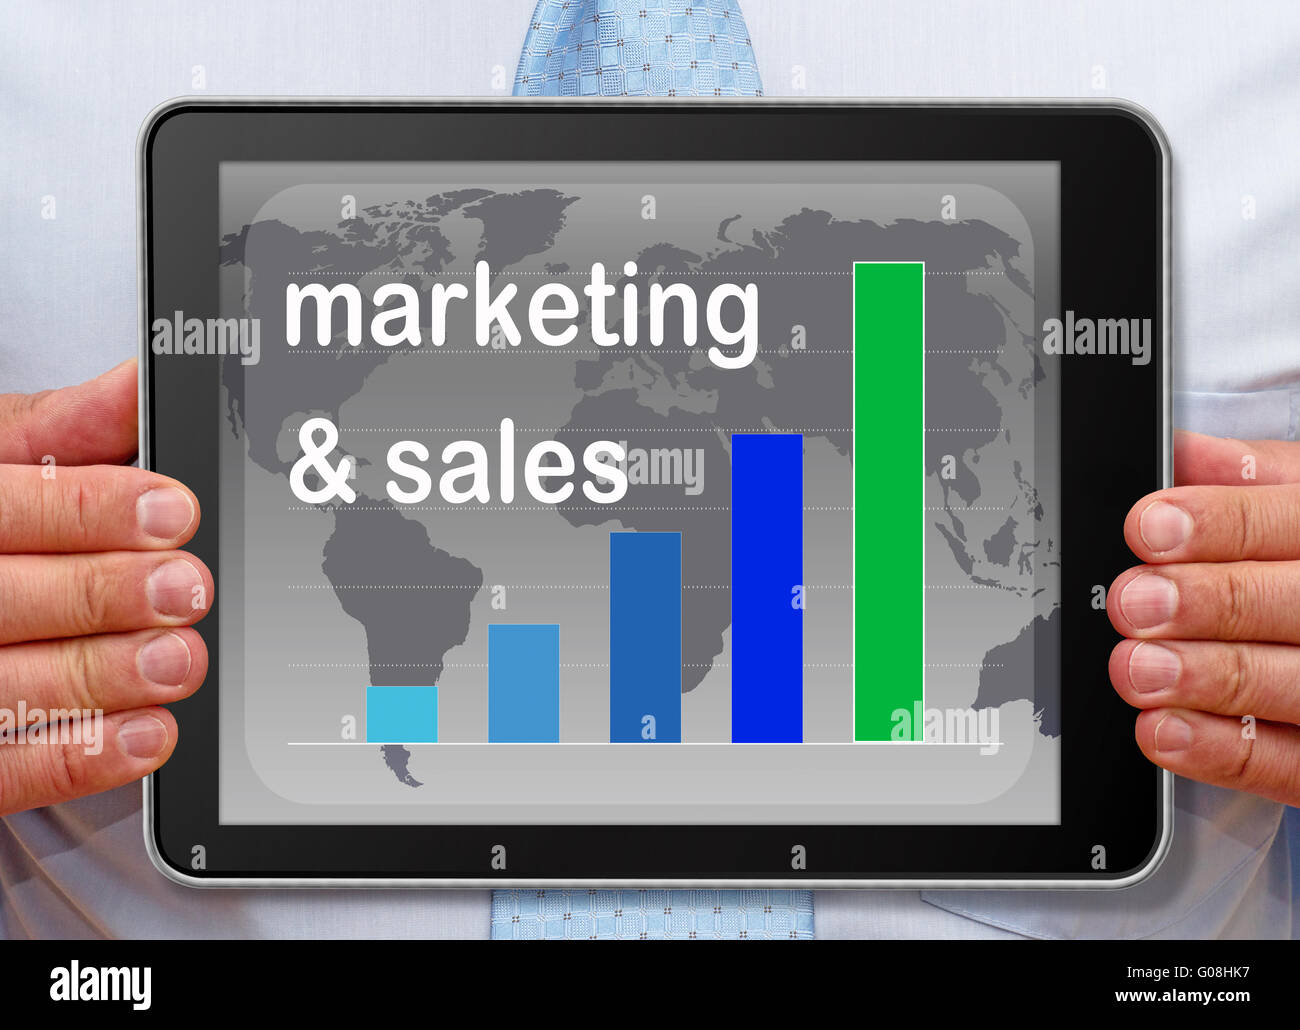 Marketing and Sales Stock Photo